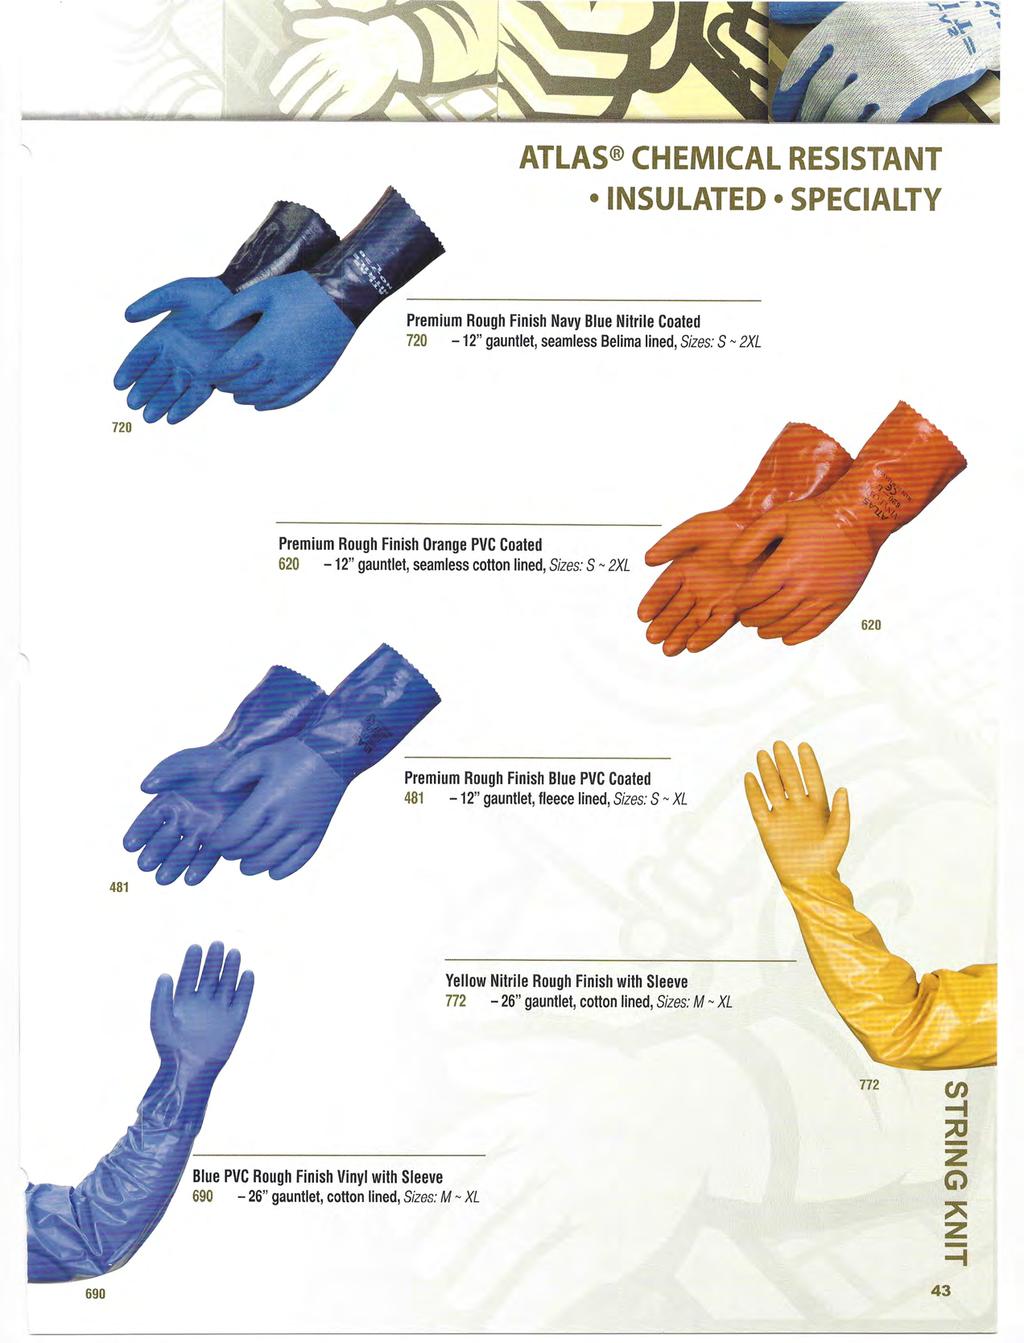 ATLAS CHEMICAL RESISTANT INSULATED SPECIALTY Premium Rough Finish Navy Blue Nitrile Coated 72-12" gauntlet, seamless Belima lined, Sizes: SN 2XL Premium Rough Finish Orange PVC Coated 62-12"